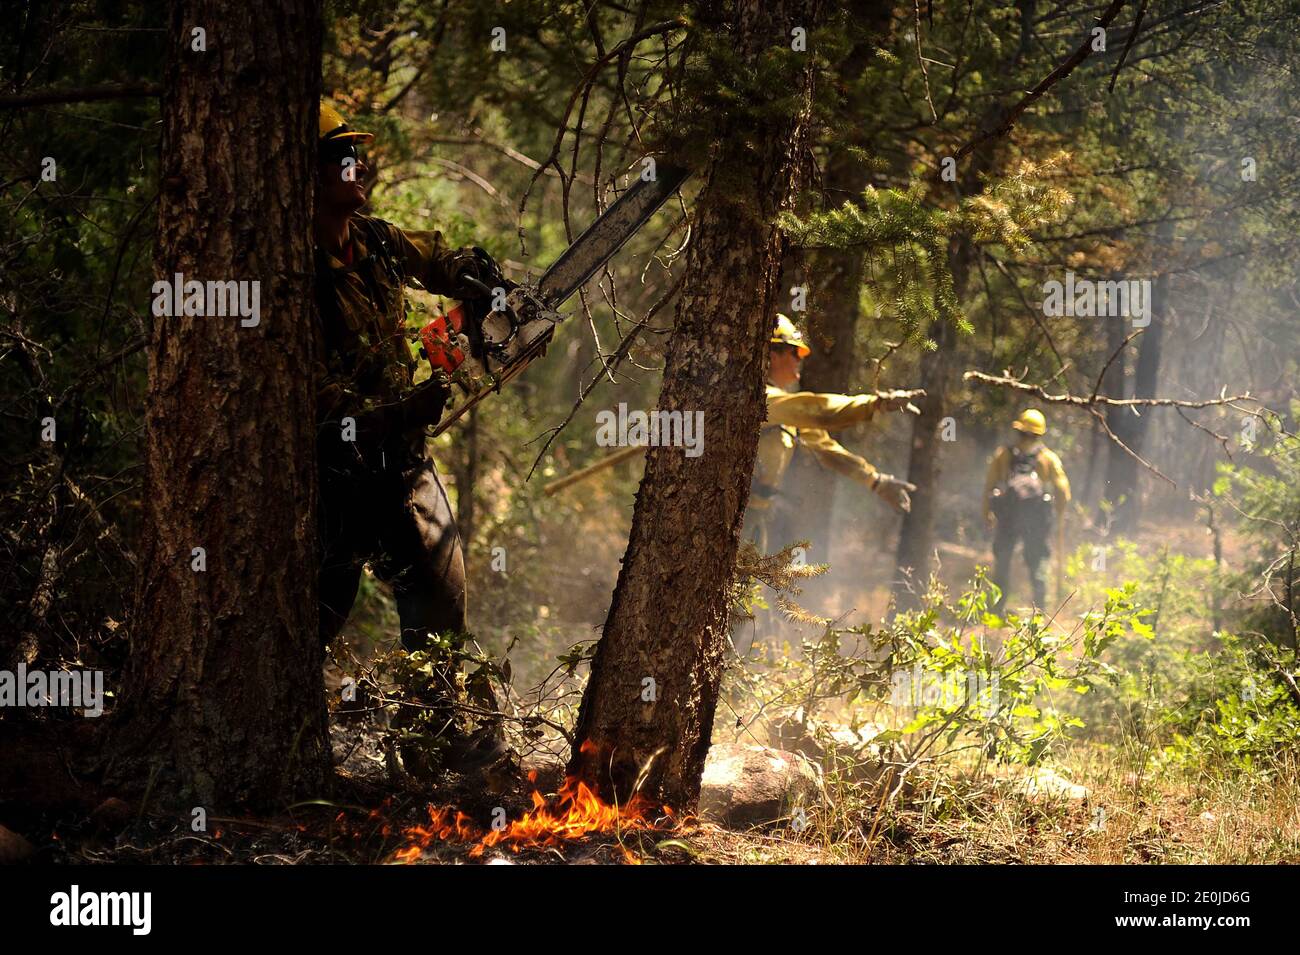 Vandenberg Air Force Base Hot Shot fire fighter Brad Mabery cuts a tree with his chainsaw while cutting and clearing a fire line on June 28, 2012 in the Mount Saint Francois area of Colorado Springs, Co. His team is helping to battle several fires in Waldo Canyon. The Waldo Canyon fire has grown to 18,500 acres and burned over 300 homes. Currently, more than 90 firefighters from the Academy, along with assets from Air Force Space Command; F.E. Warren Air Force Base, Wyo.; Fort Carson, Colo.; and the local community continue to fight the Waldo Canyon fire. Photo by U.S. Air Force via ABACAPRESS Stock Photo